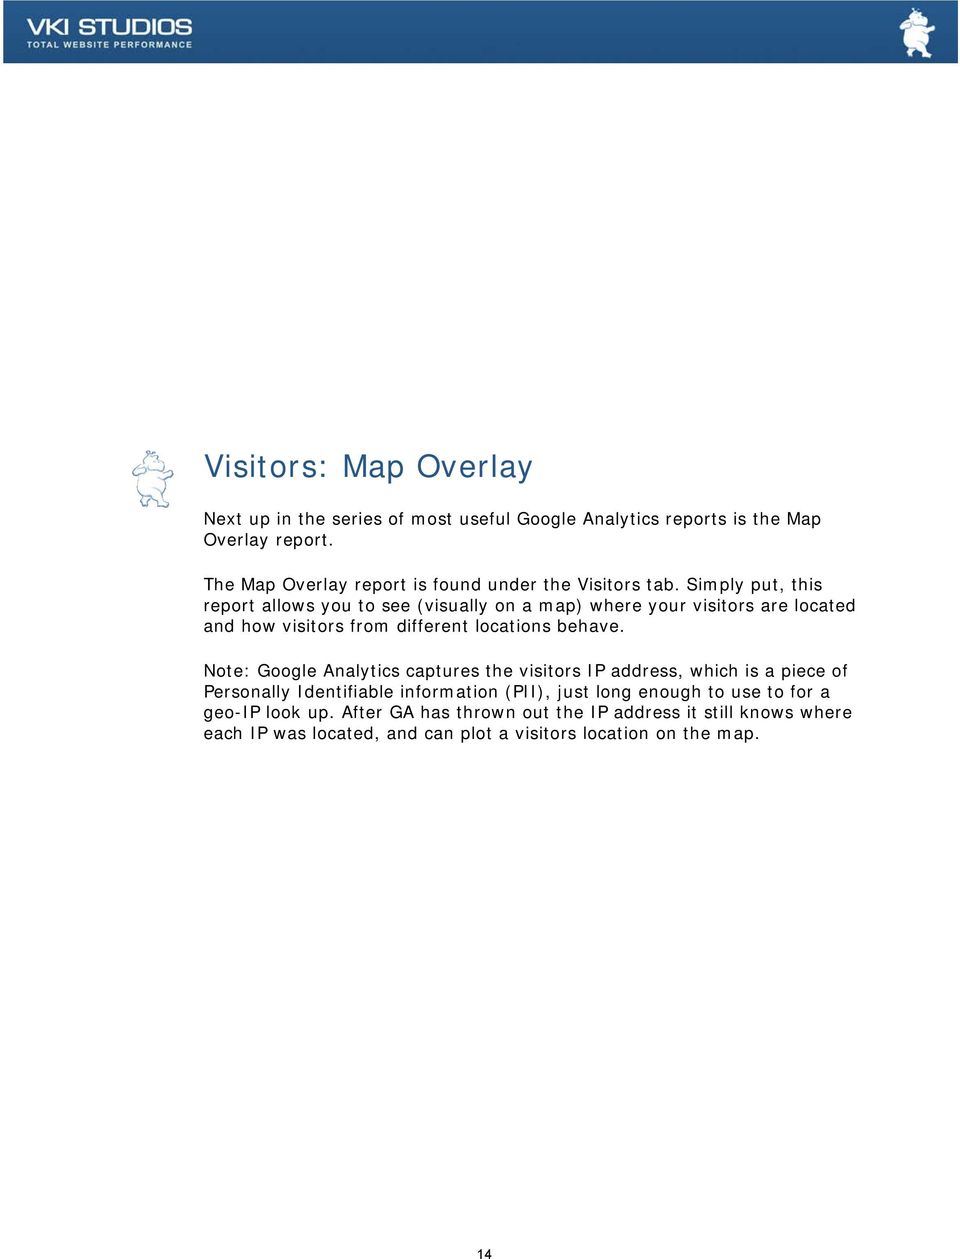 Simply put, this report allows you to see (visually on a map) where your visitors are located and how visitors from different locations behave.